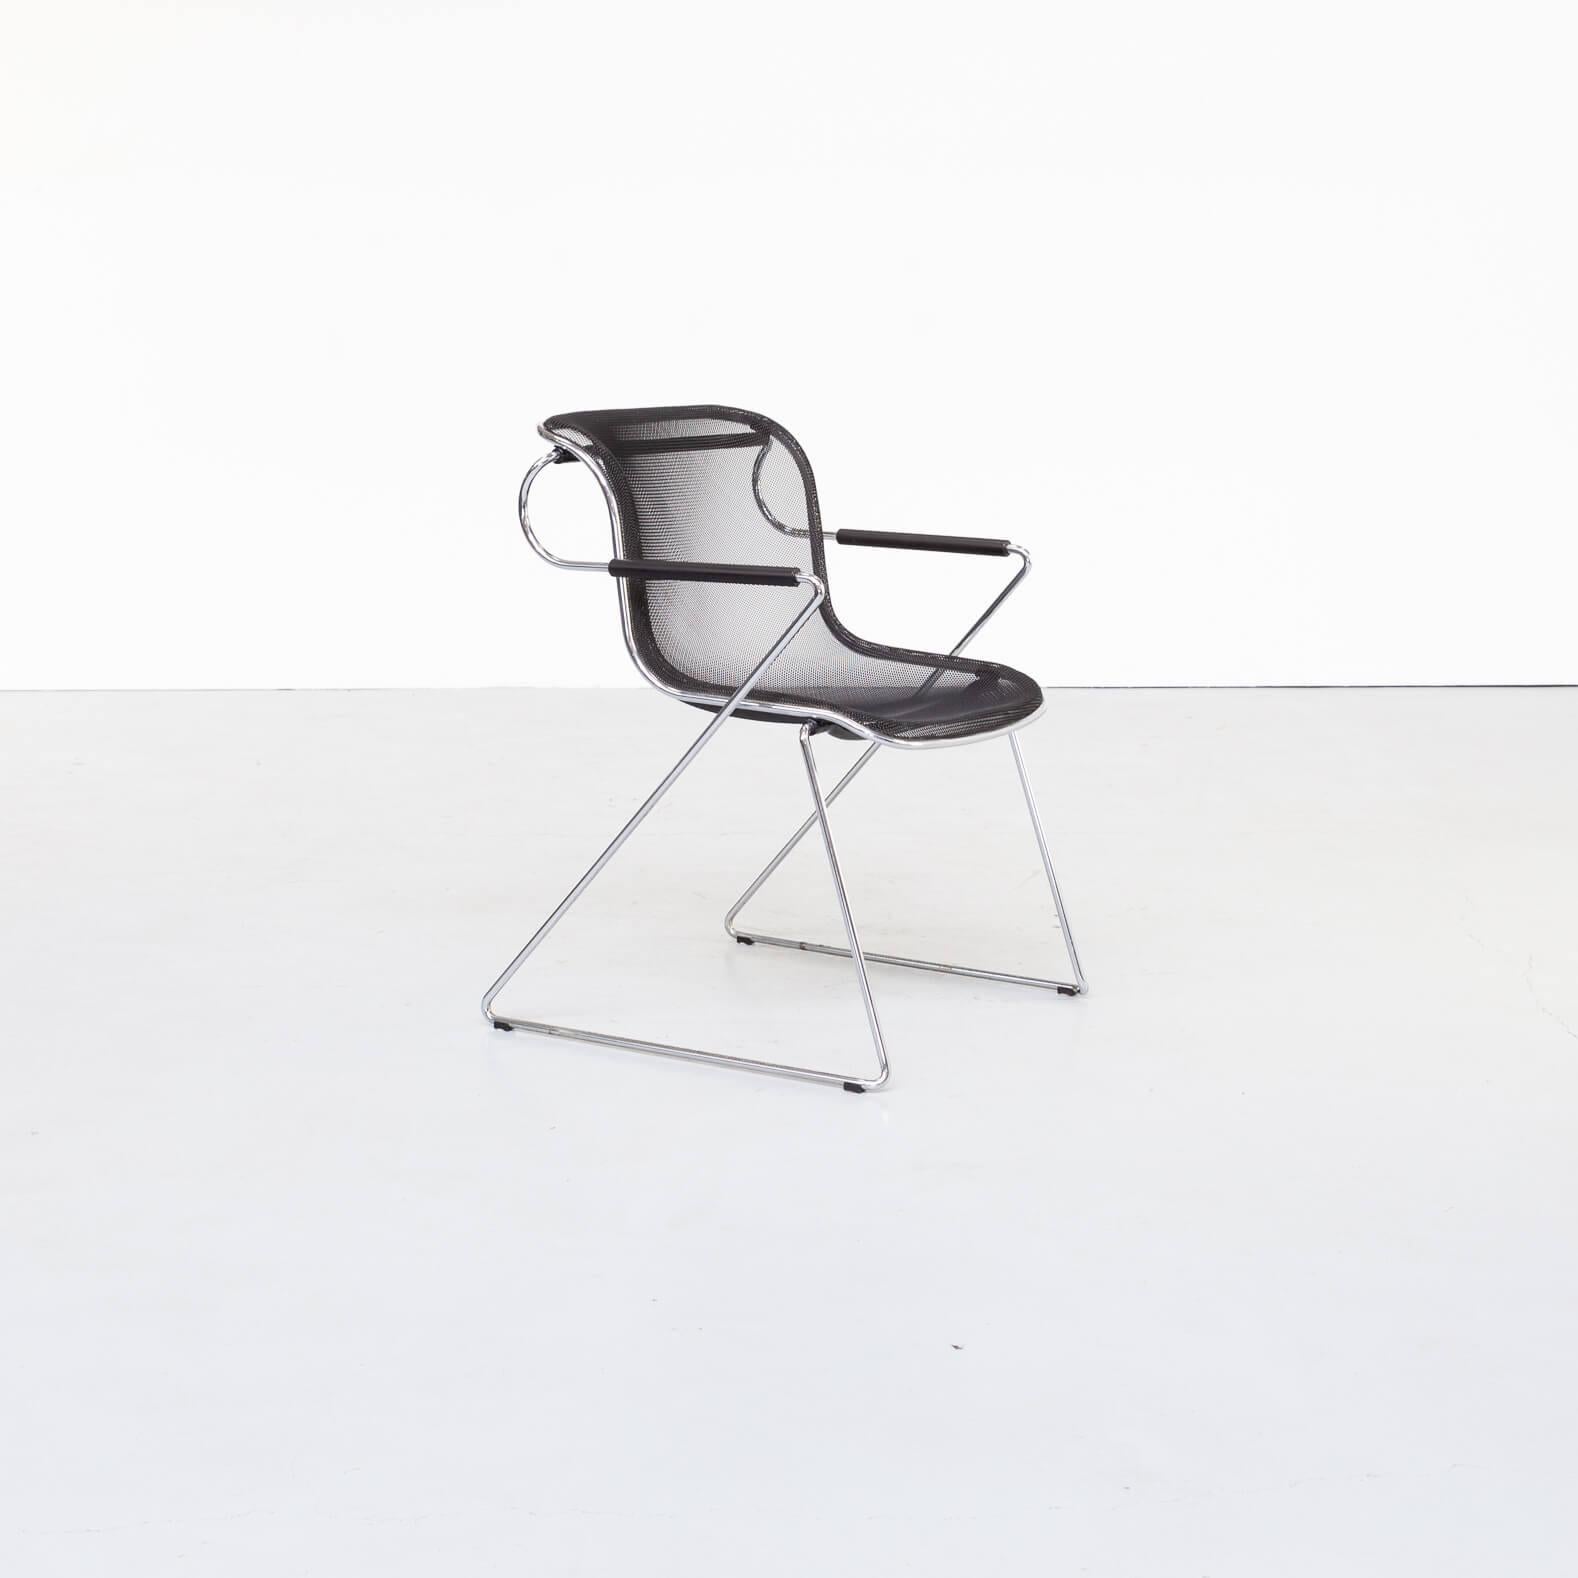 20th Century Charles Pollock ‘Penelope’ Chairs for Castelli Set/4 For Sale